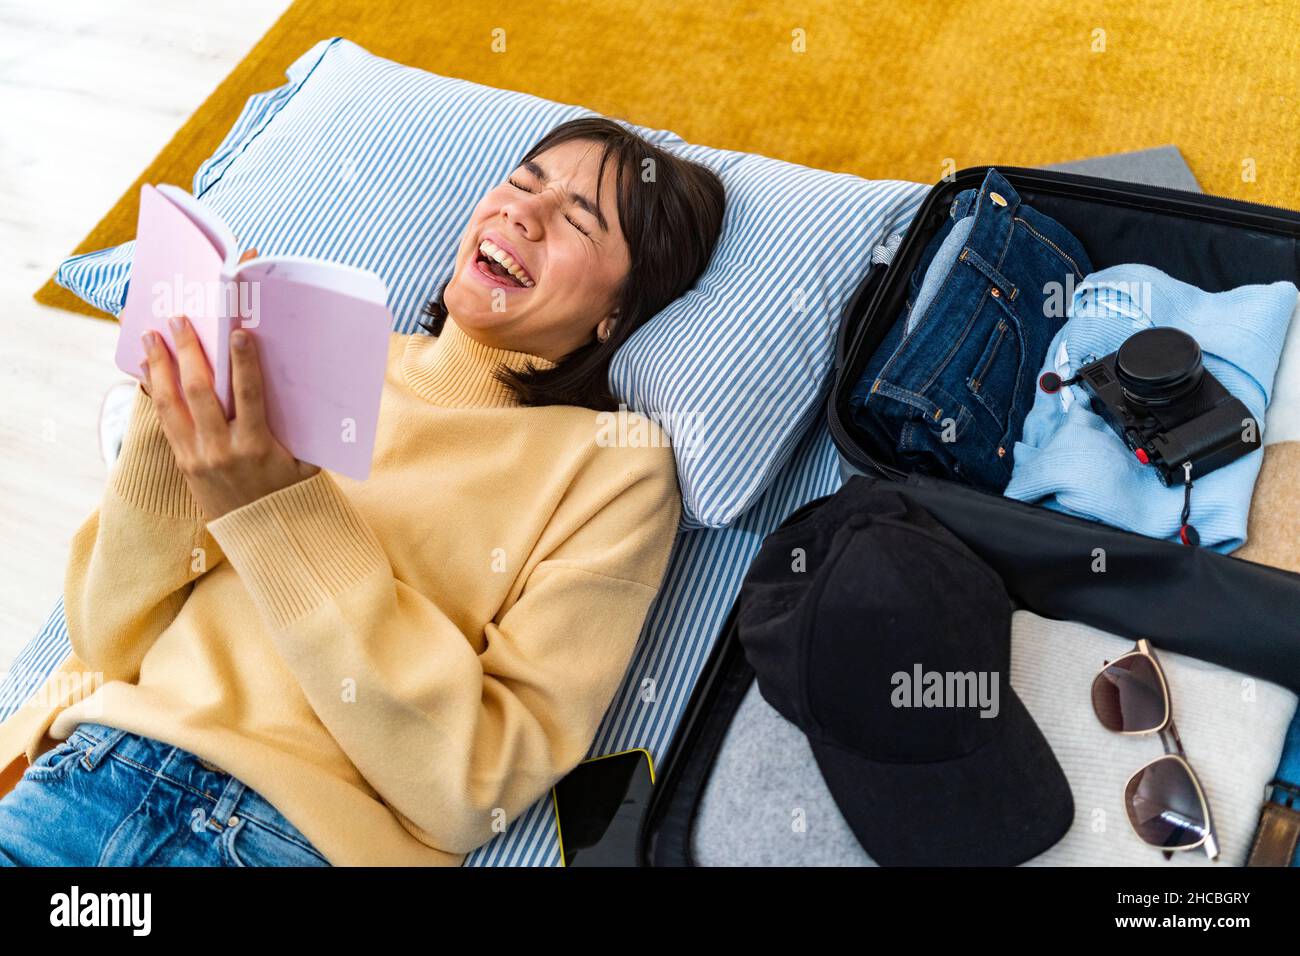 Smiling woman taking selfie with smart phone while lying by luggage on bed Stock Photo